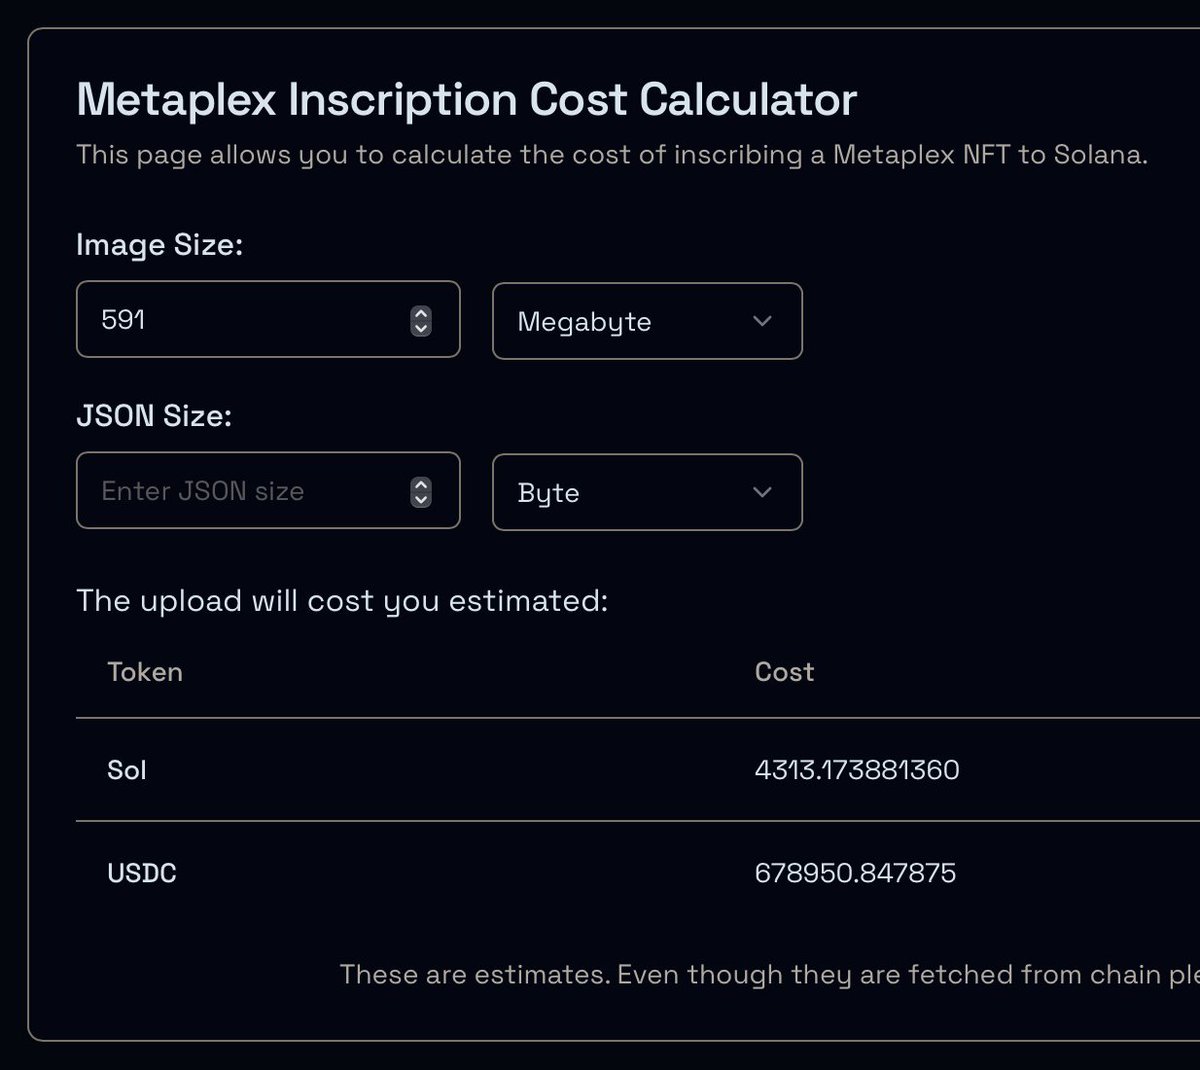 LMAO, the PRIME MACHIN collection would've cost $678,950 to 'inscribe' on Solana. Even worse, inscriptions are not captured onchain as objects.

#Sui is truly unmatched for capturing ownership and data onchain in a composable manner.